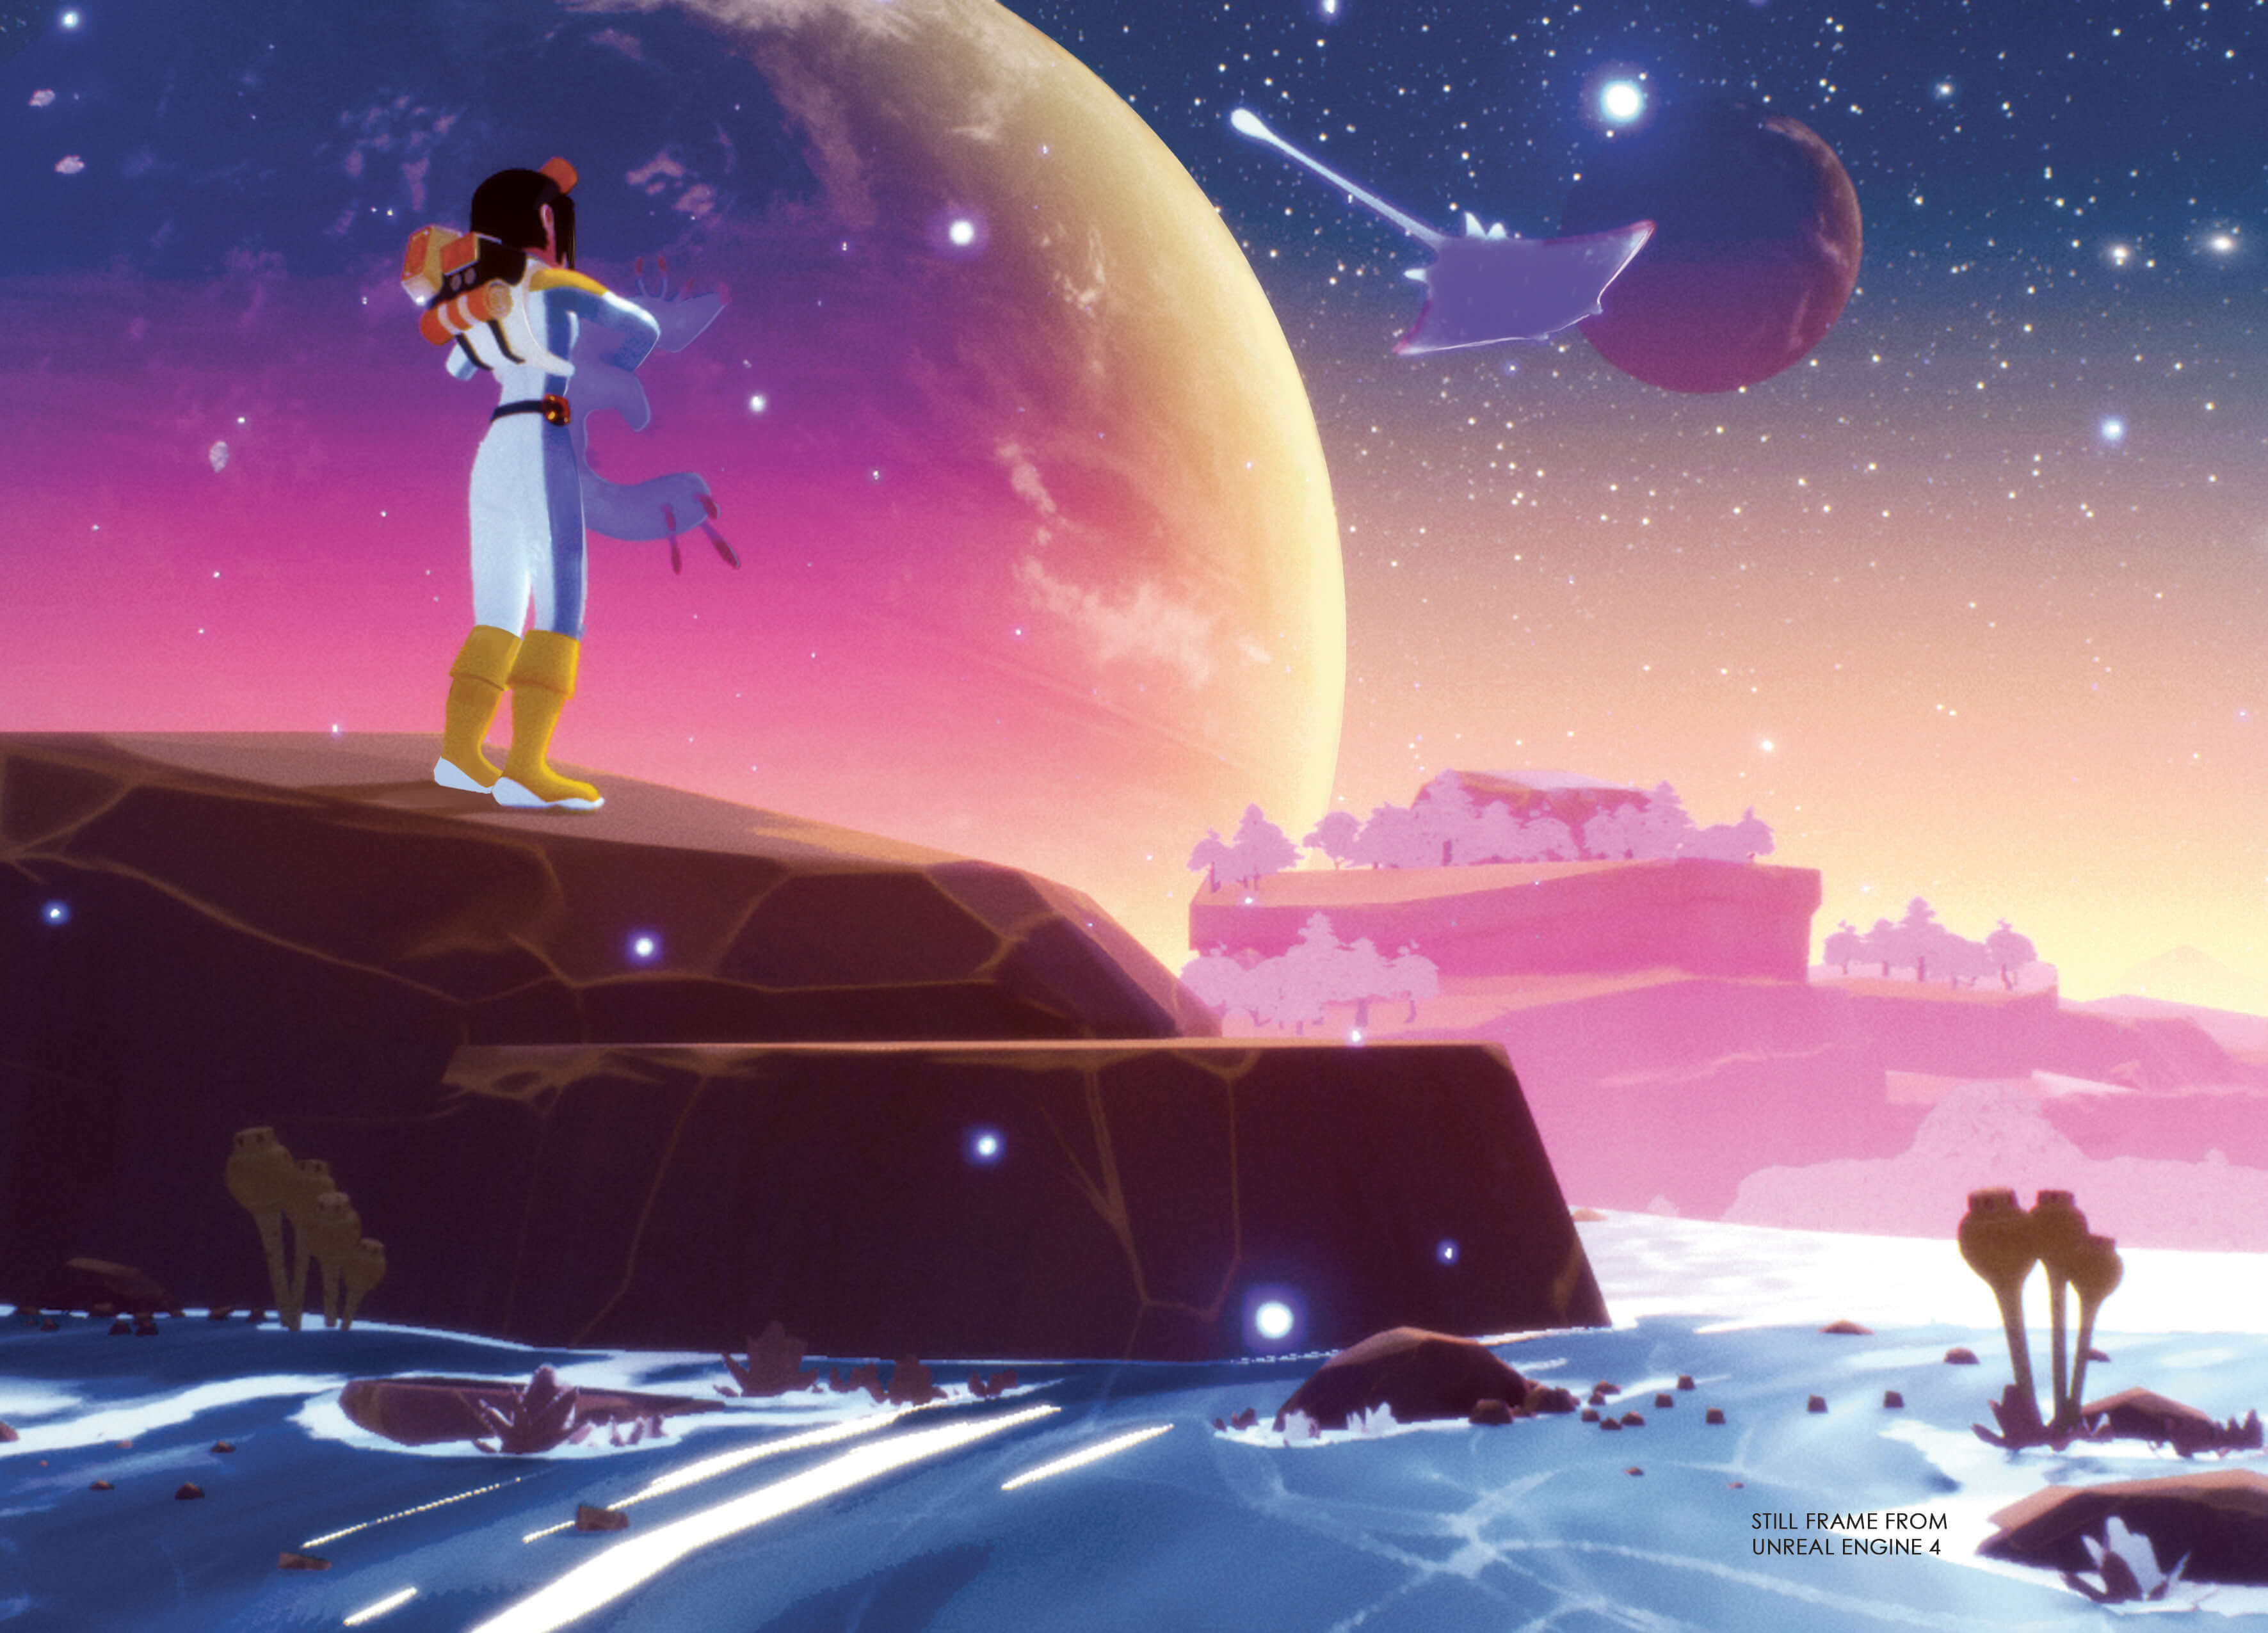 In-engine still frame showing an astronaut and alien creature standing on a rocky outcrop, looking out at the sky at night.